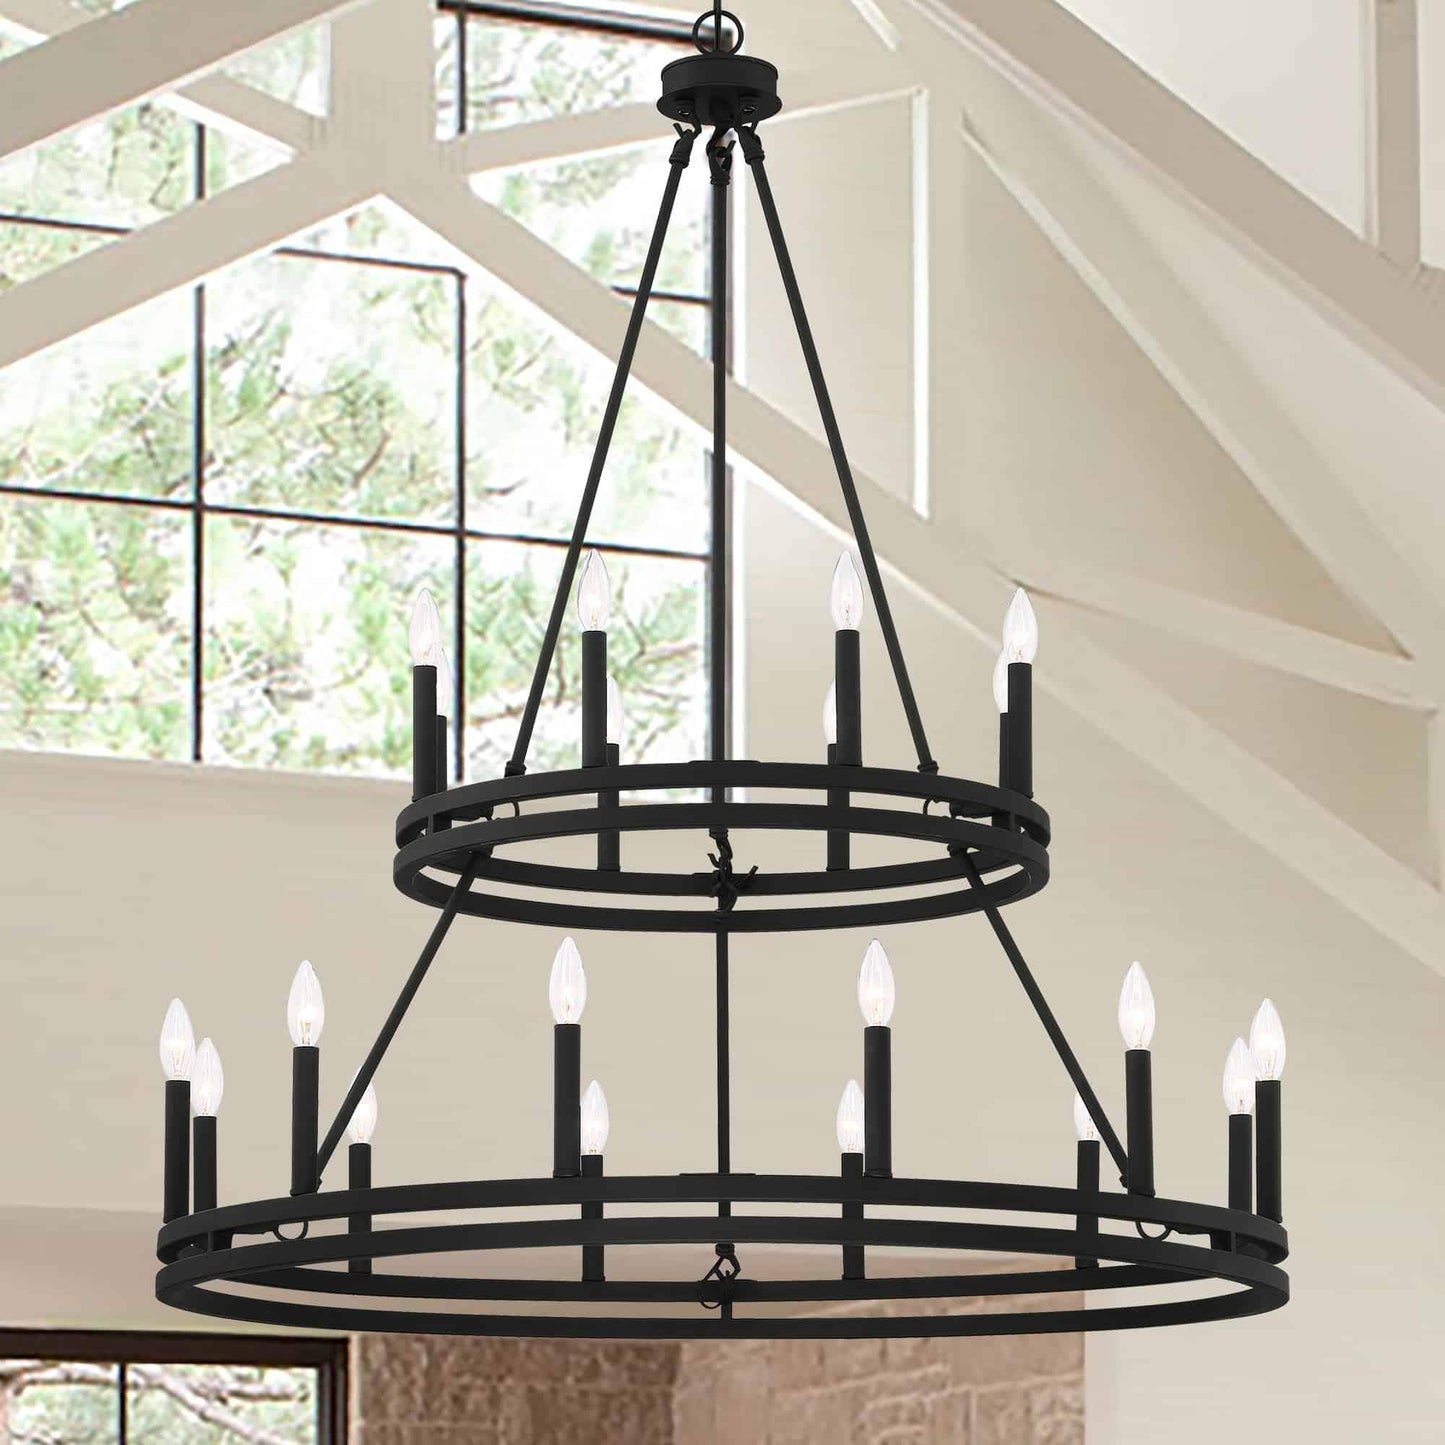 20 light candle style wagon wheel tiered chandelier (4) by ACROMA